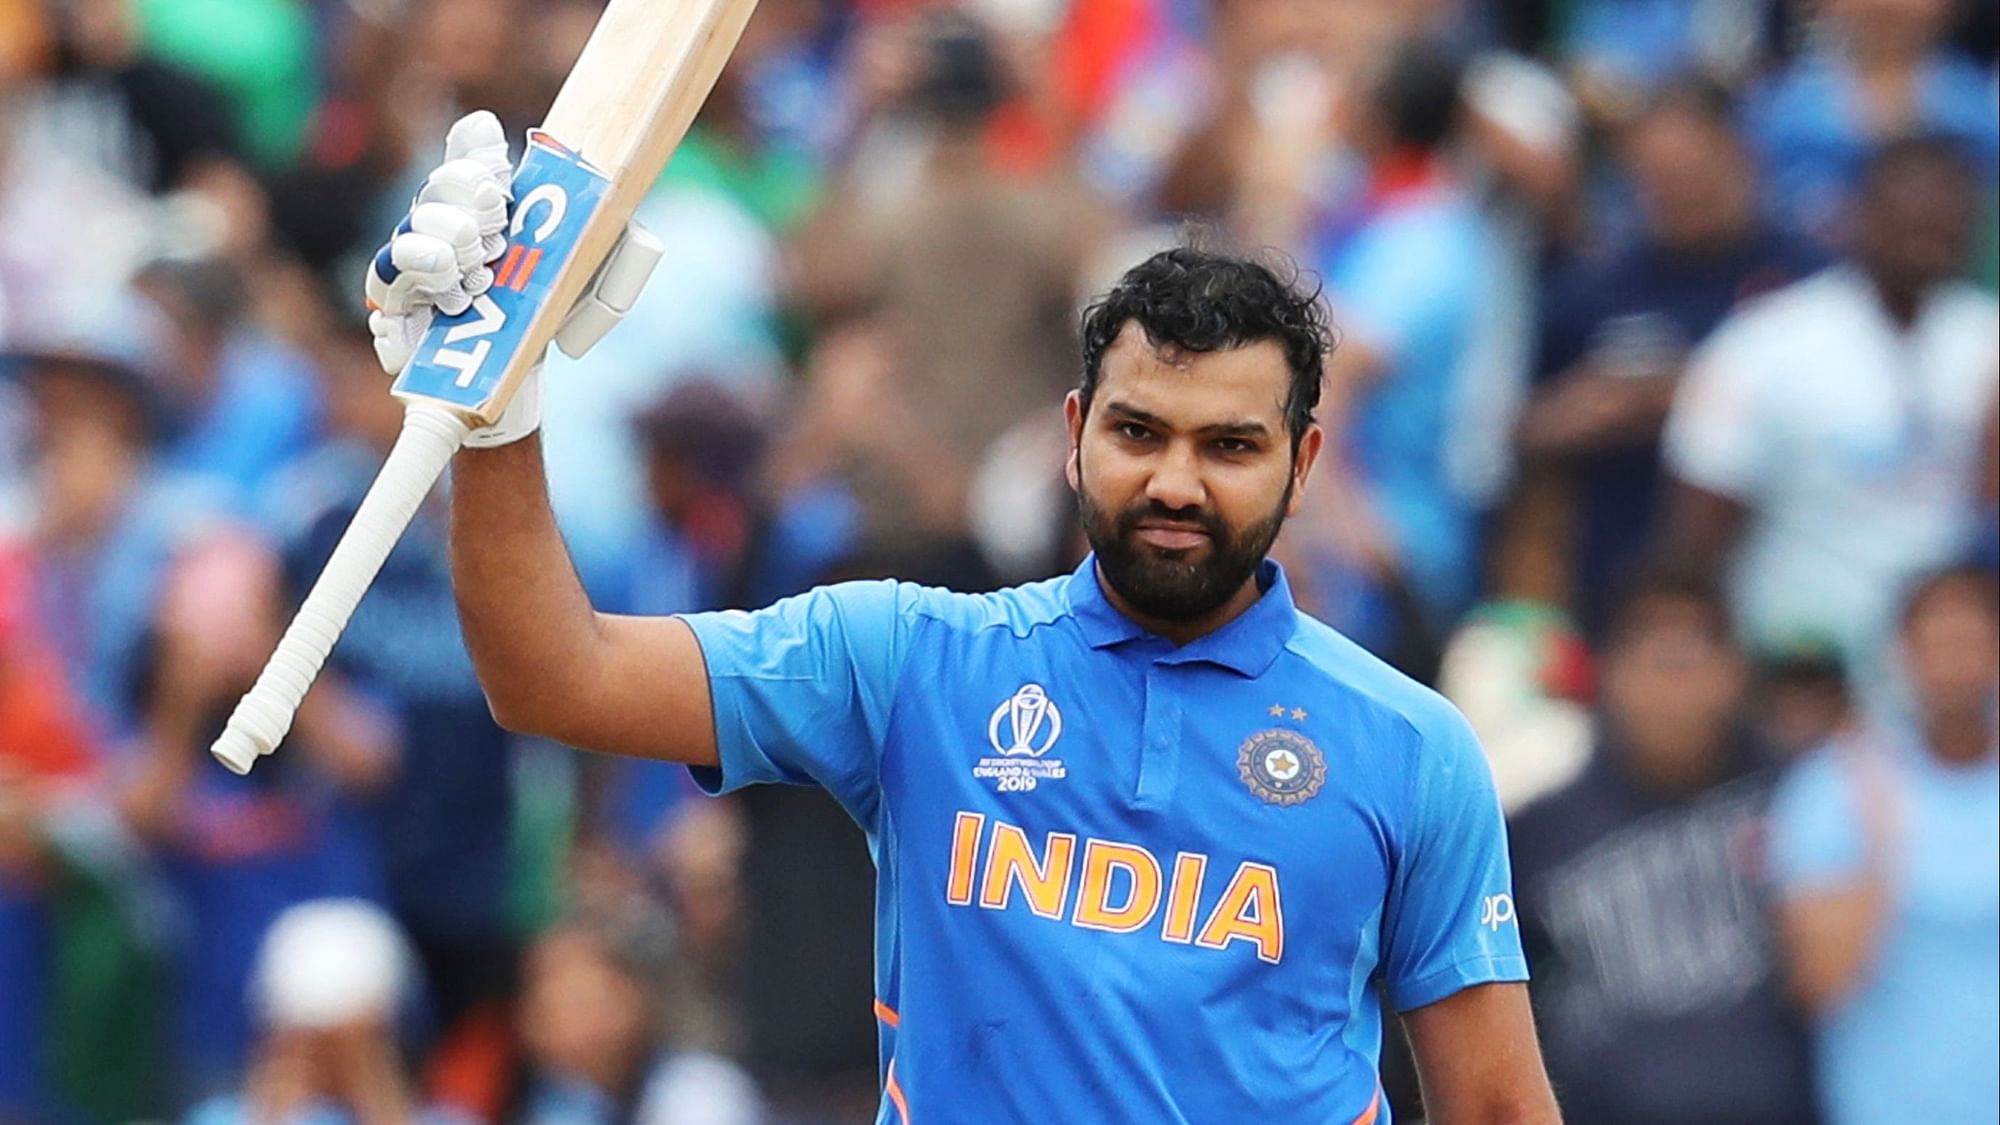 India’s vice-captain Rohit Sharma has justified his tag as one of the best limited overs batsmen thus far at the ongoing World Cup.